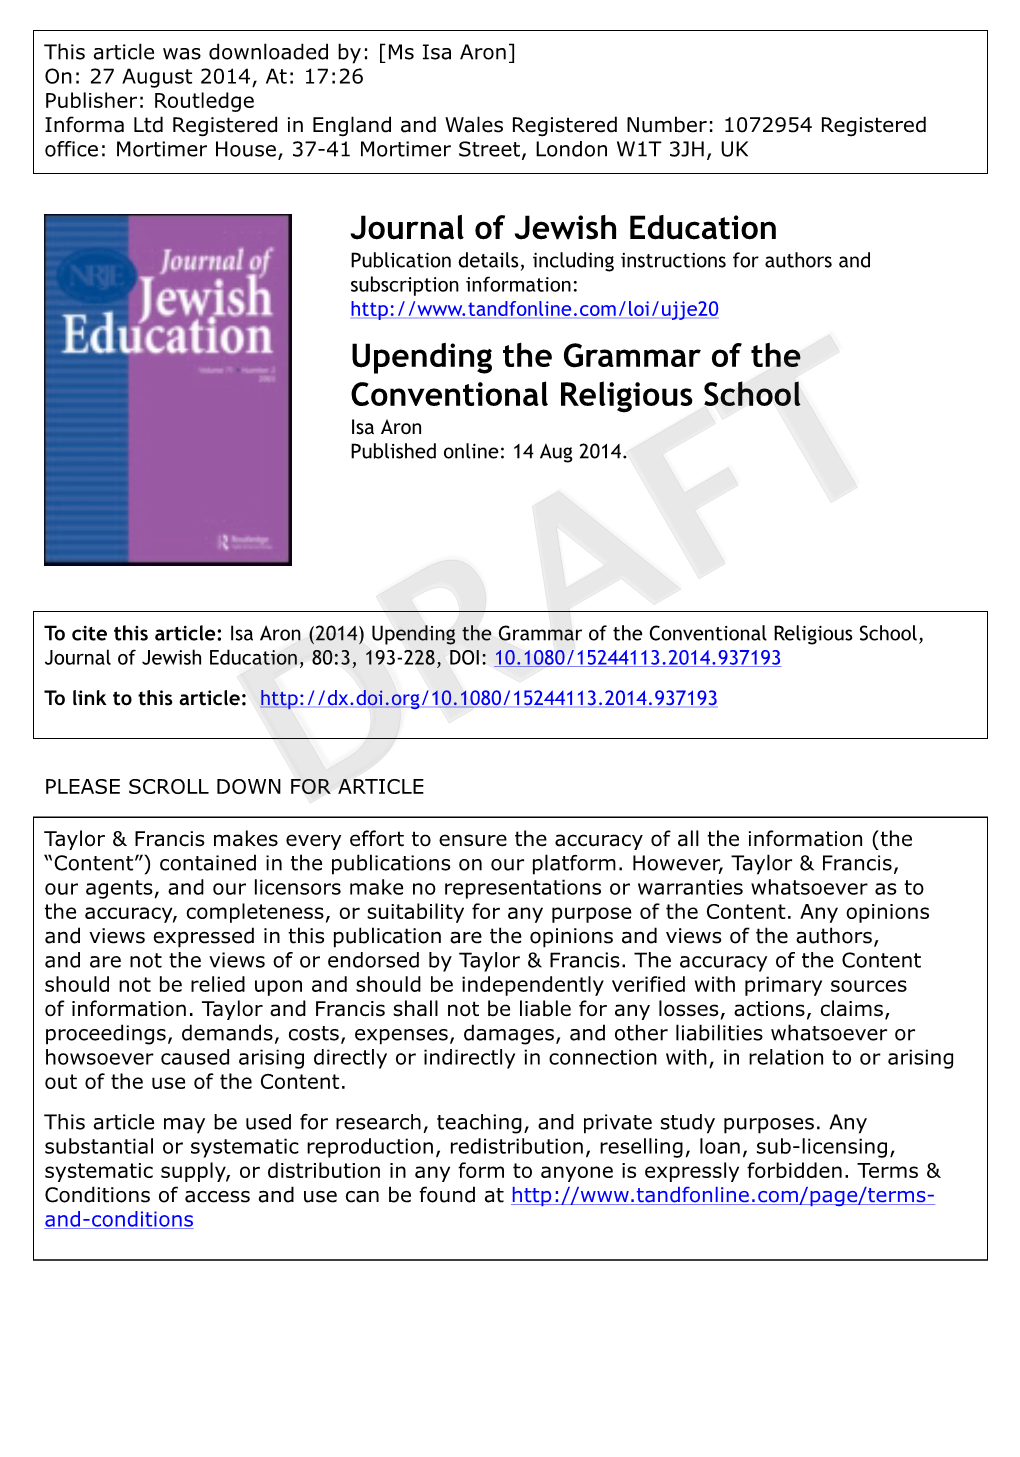 Journal of Jewish Education Upending the Grammar of The